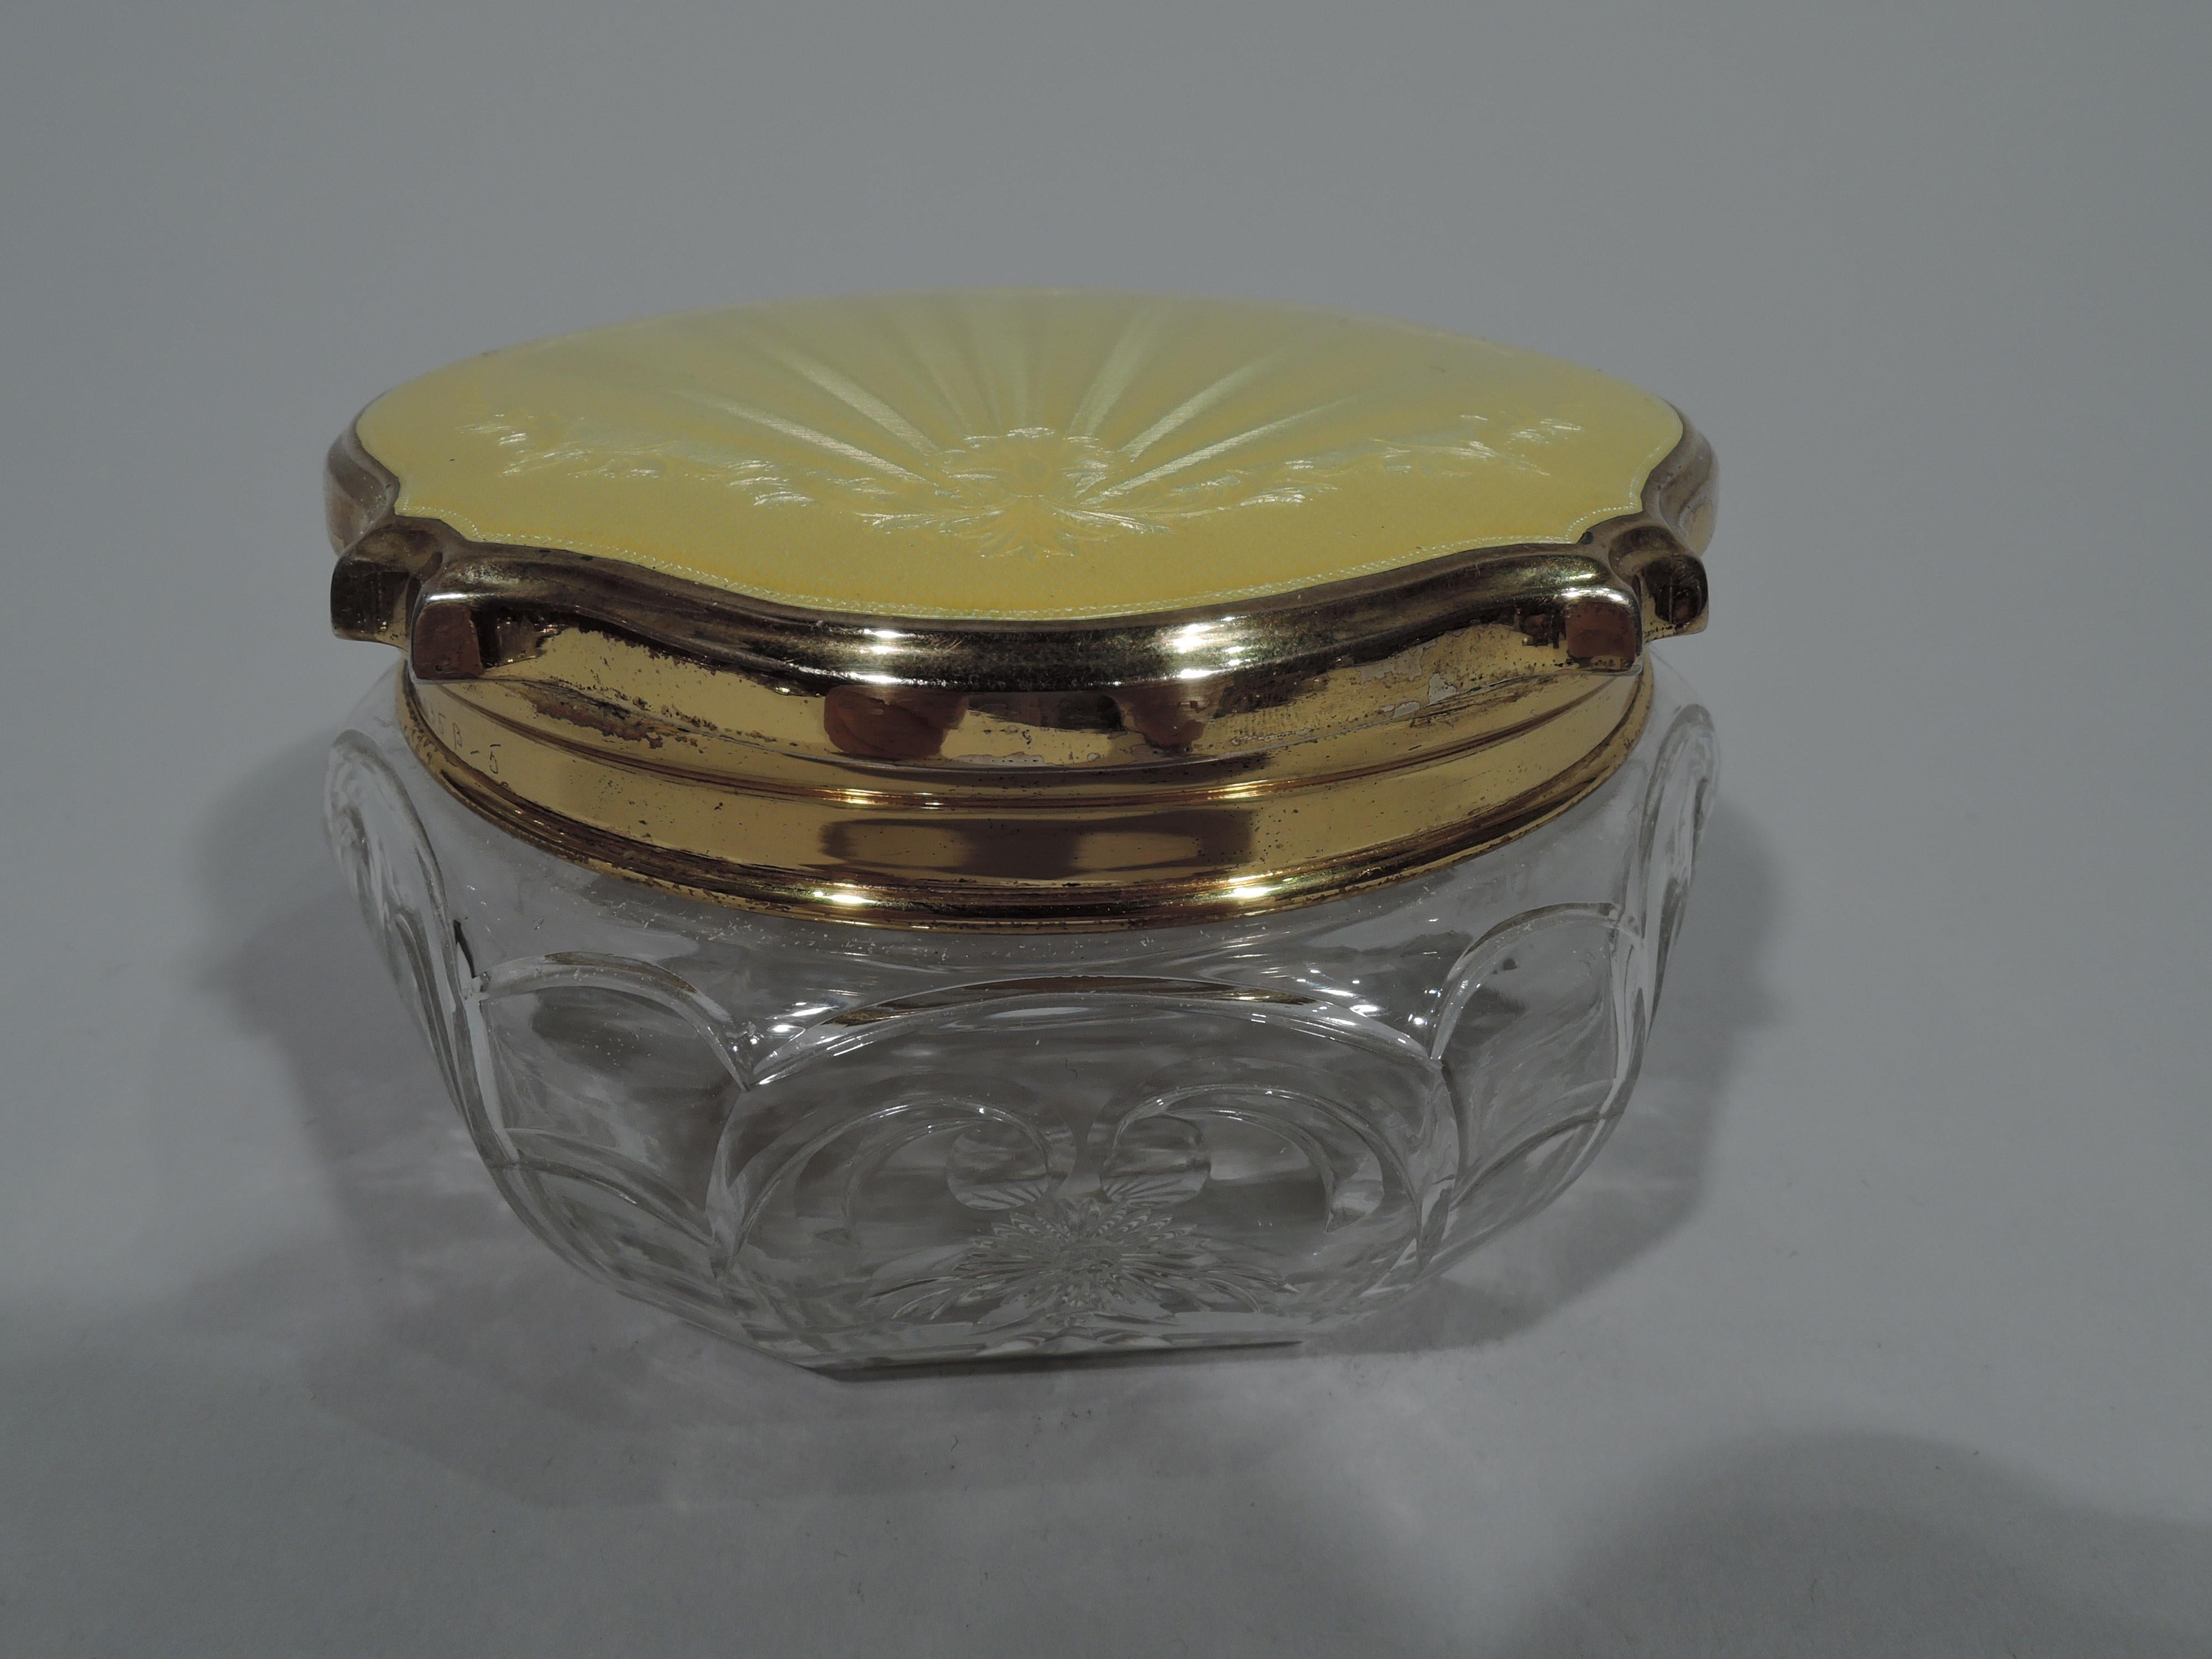 George V crystal powder jar with gilt sterling silver and enamel cover. Made by Adie Brothers in Birmingham in 1930. Bellied with alternating wide and clear facets and stylized floral ornament. Gilt sterling silver shaped cover has gently curved top